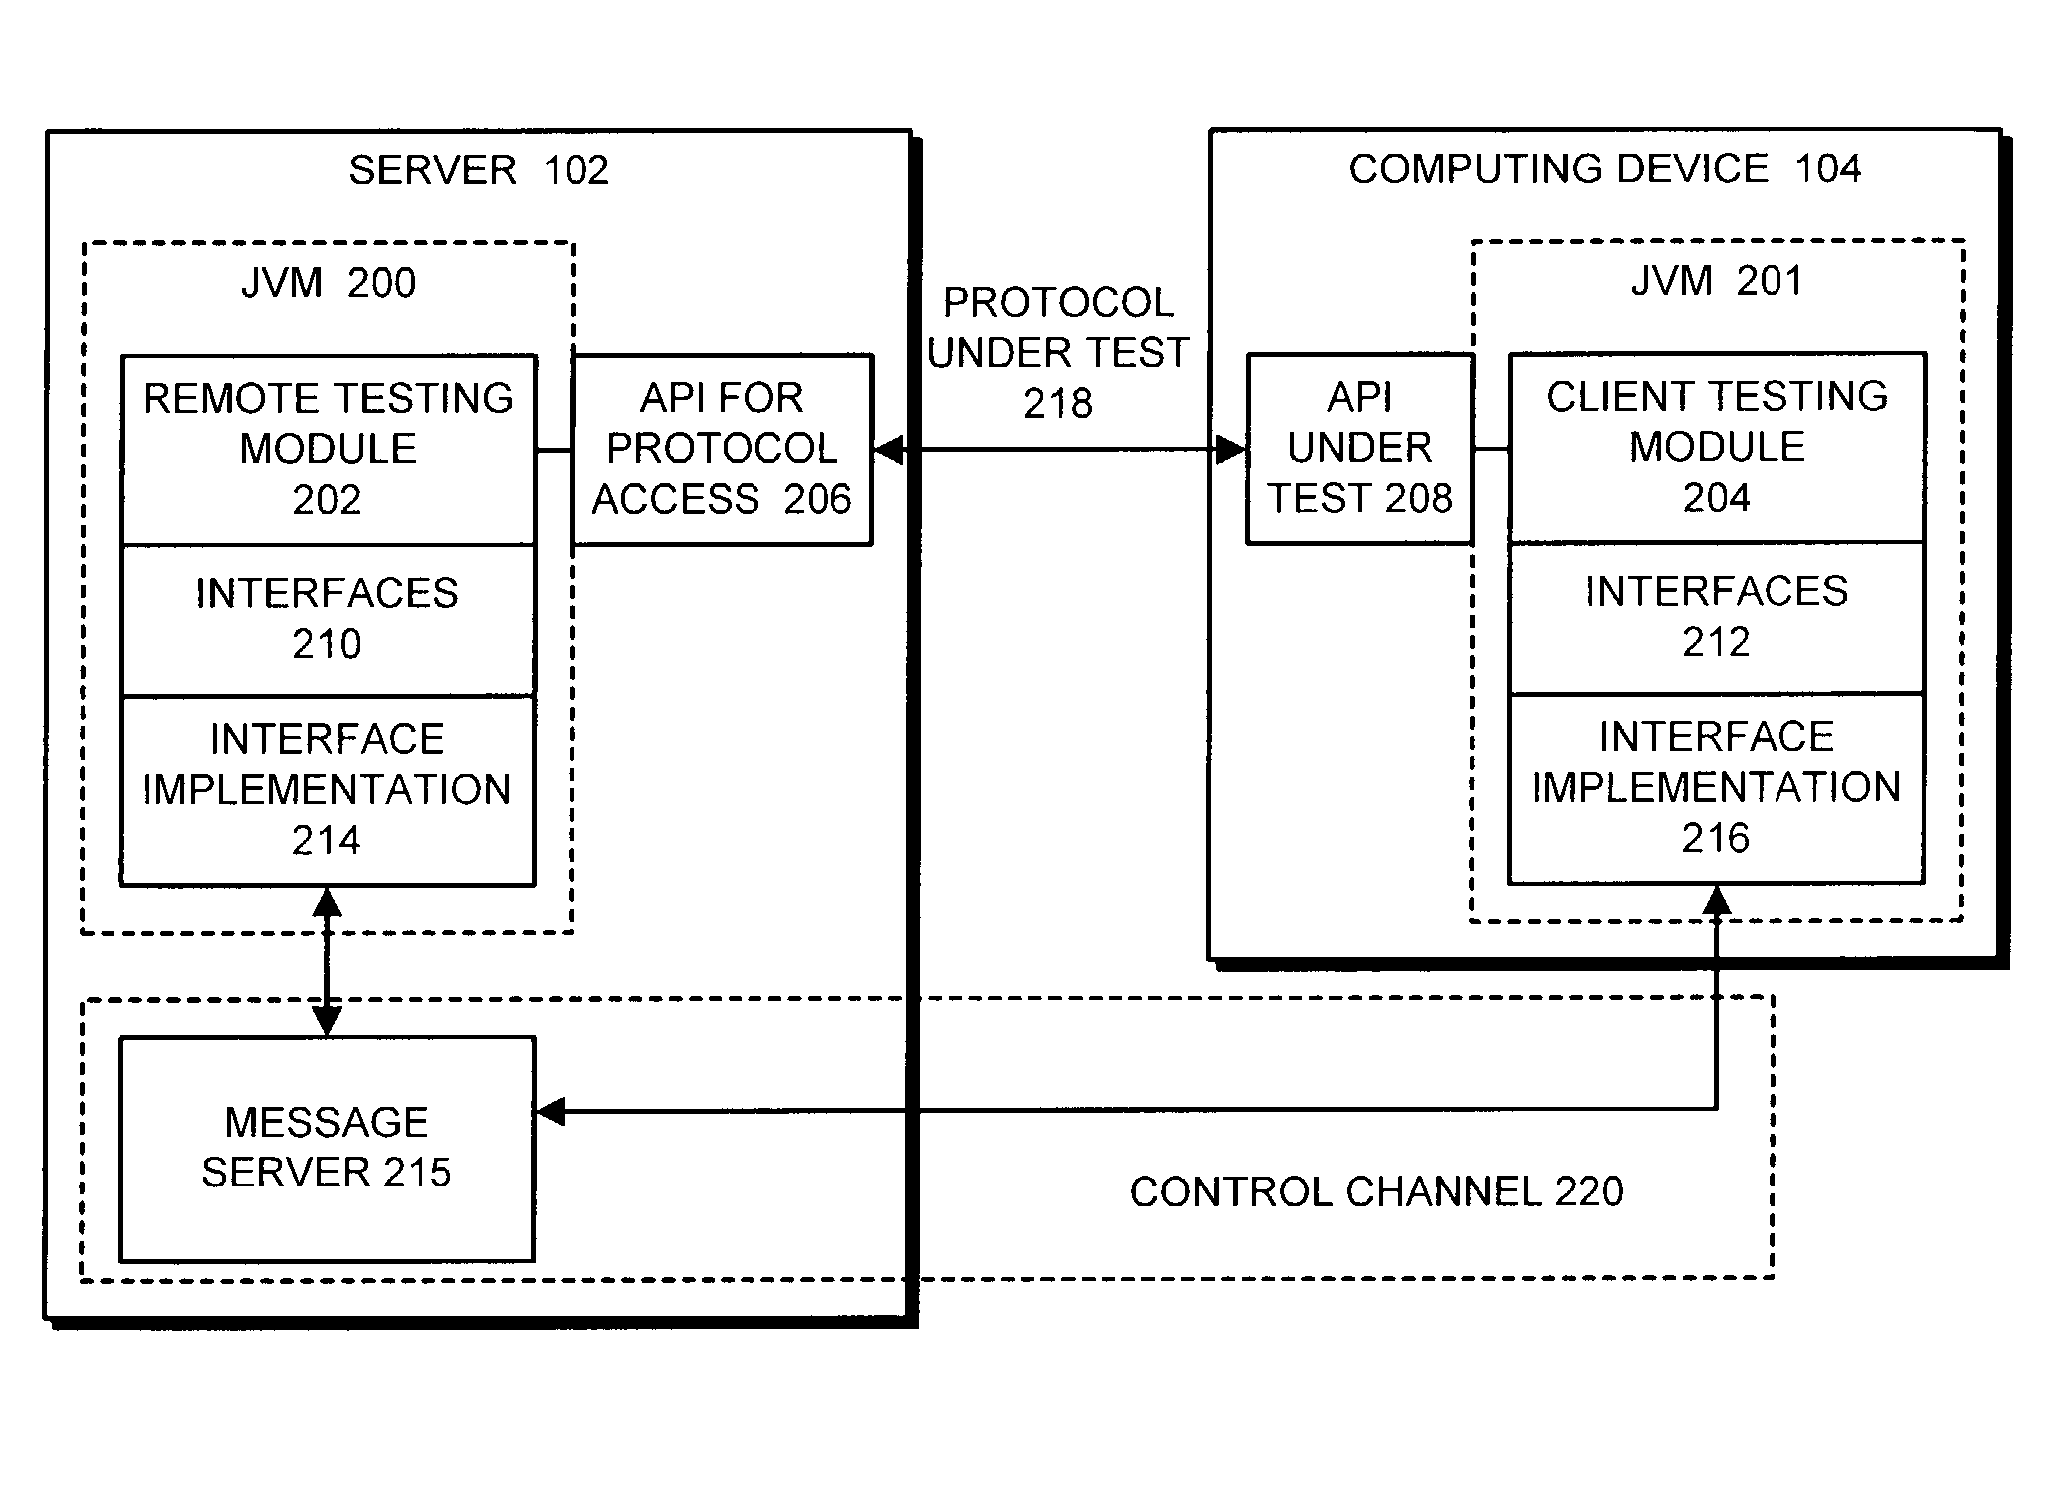 Compliance testing communication protocols implemented on resource-constrained computing devices